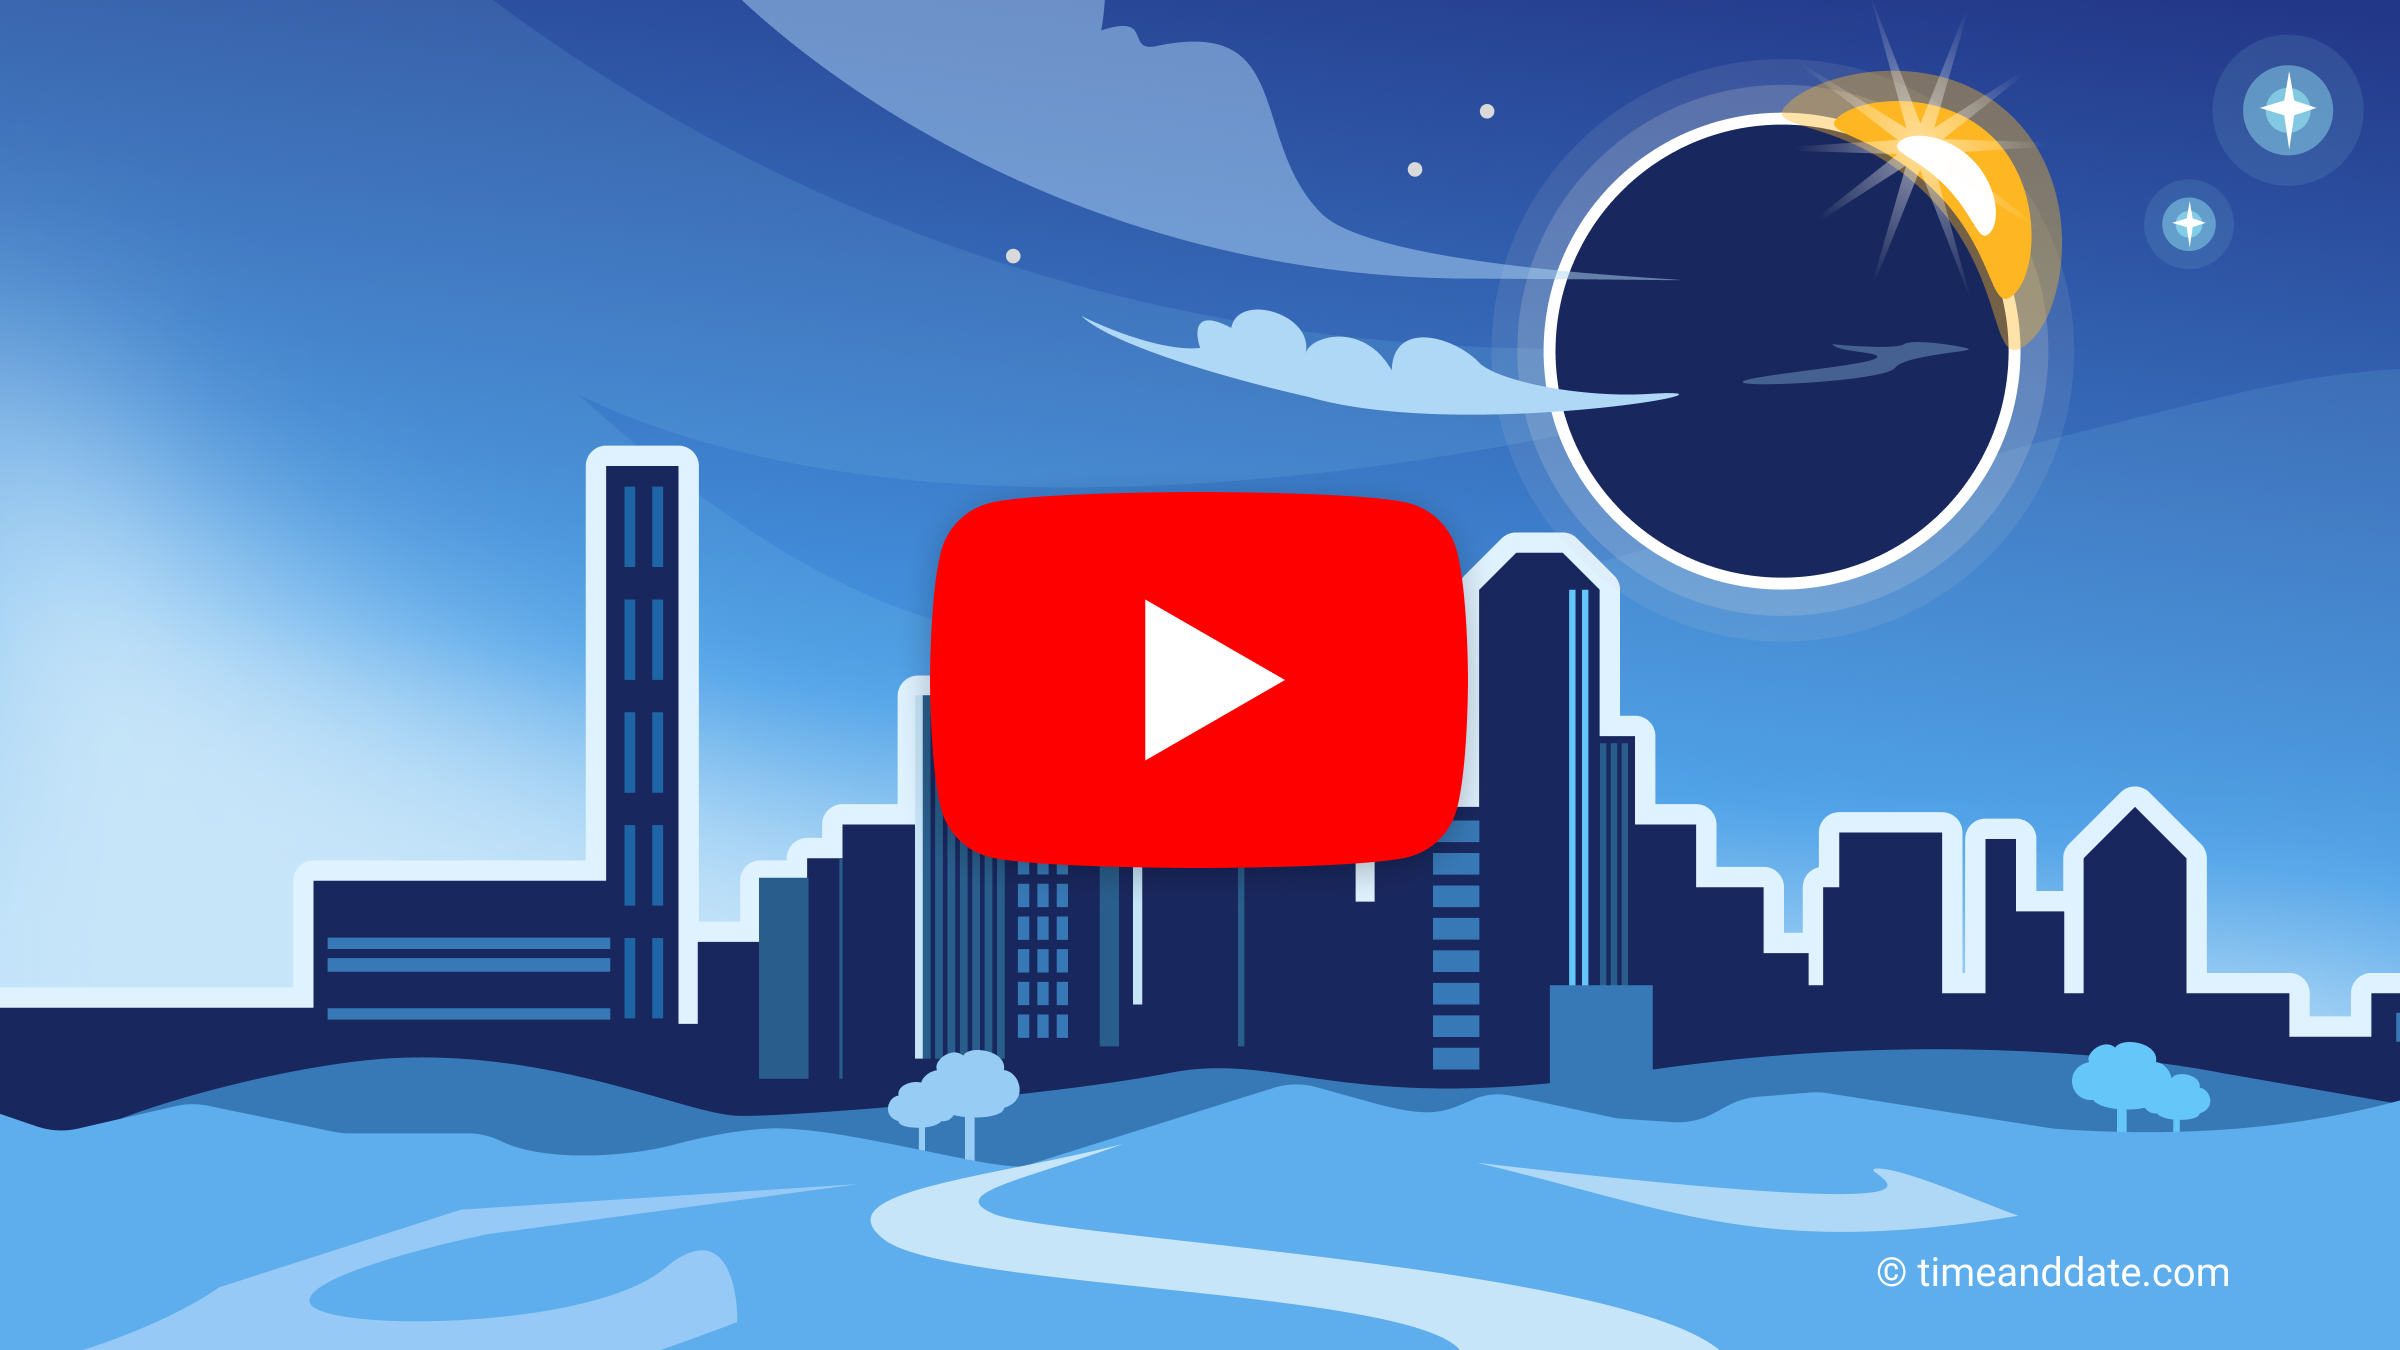 Illustration of a city skyline with skyscrapers and an eclipsed sun above it saying total solar eclipse April 8, 2024.